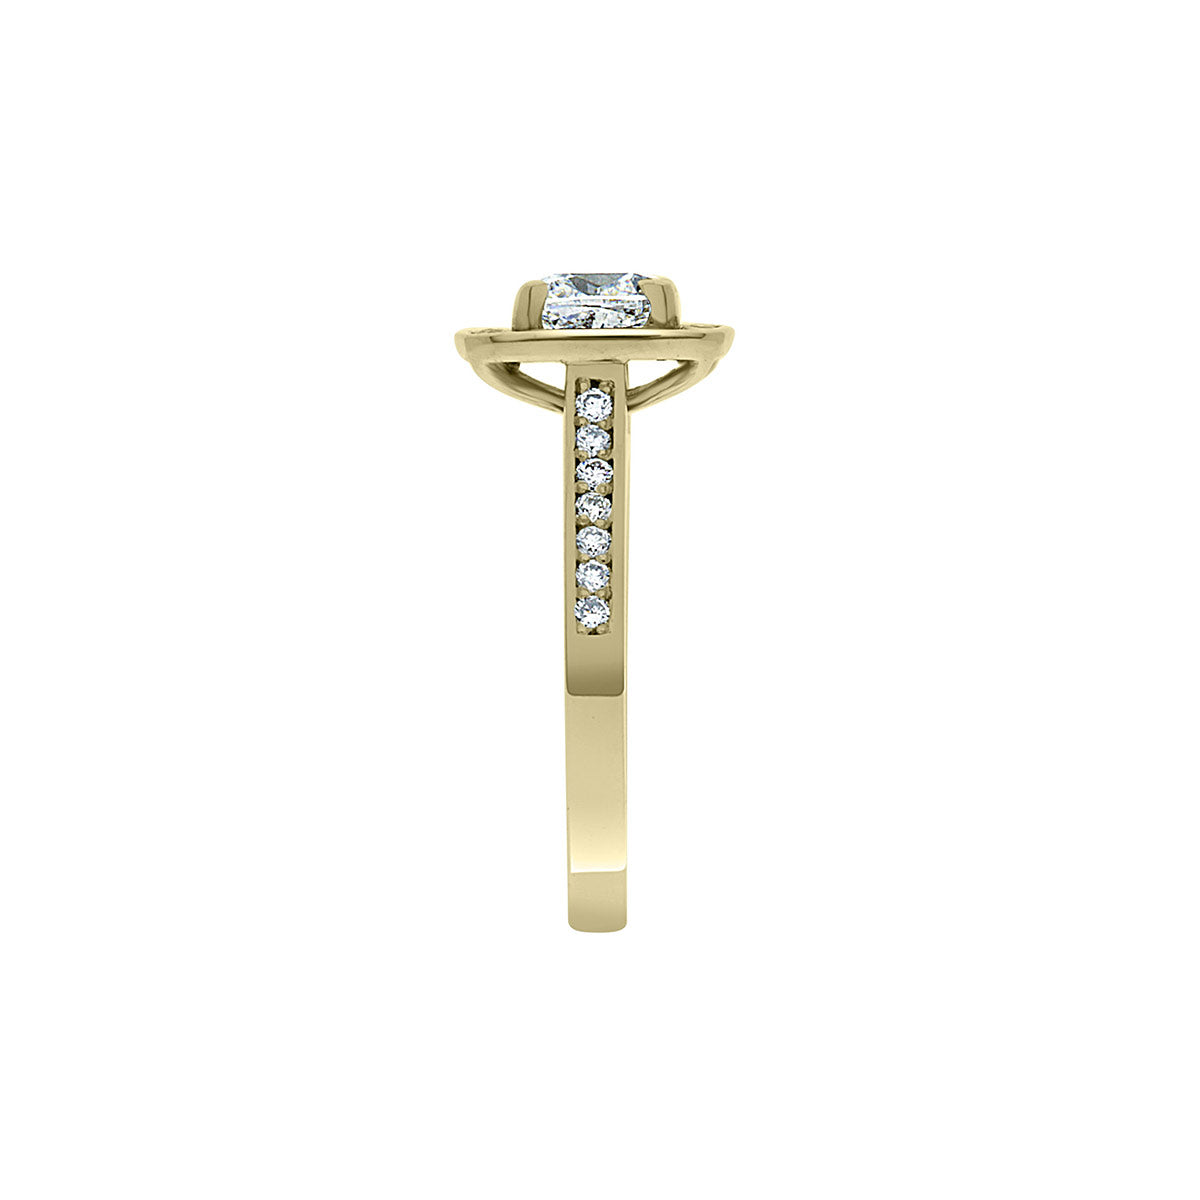 Cushion Cut Diamond Ring in yellow gold viewed from a side angle